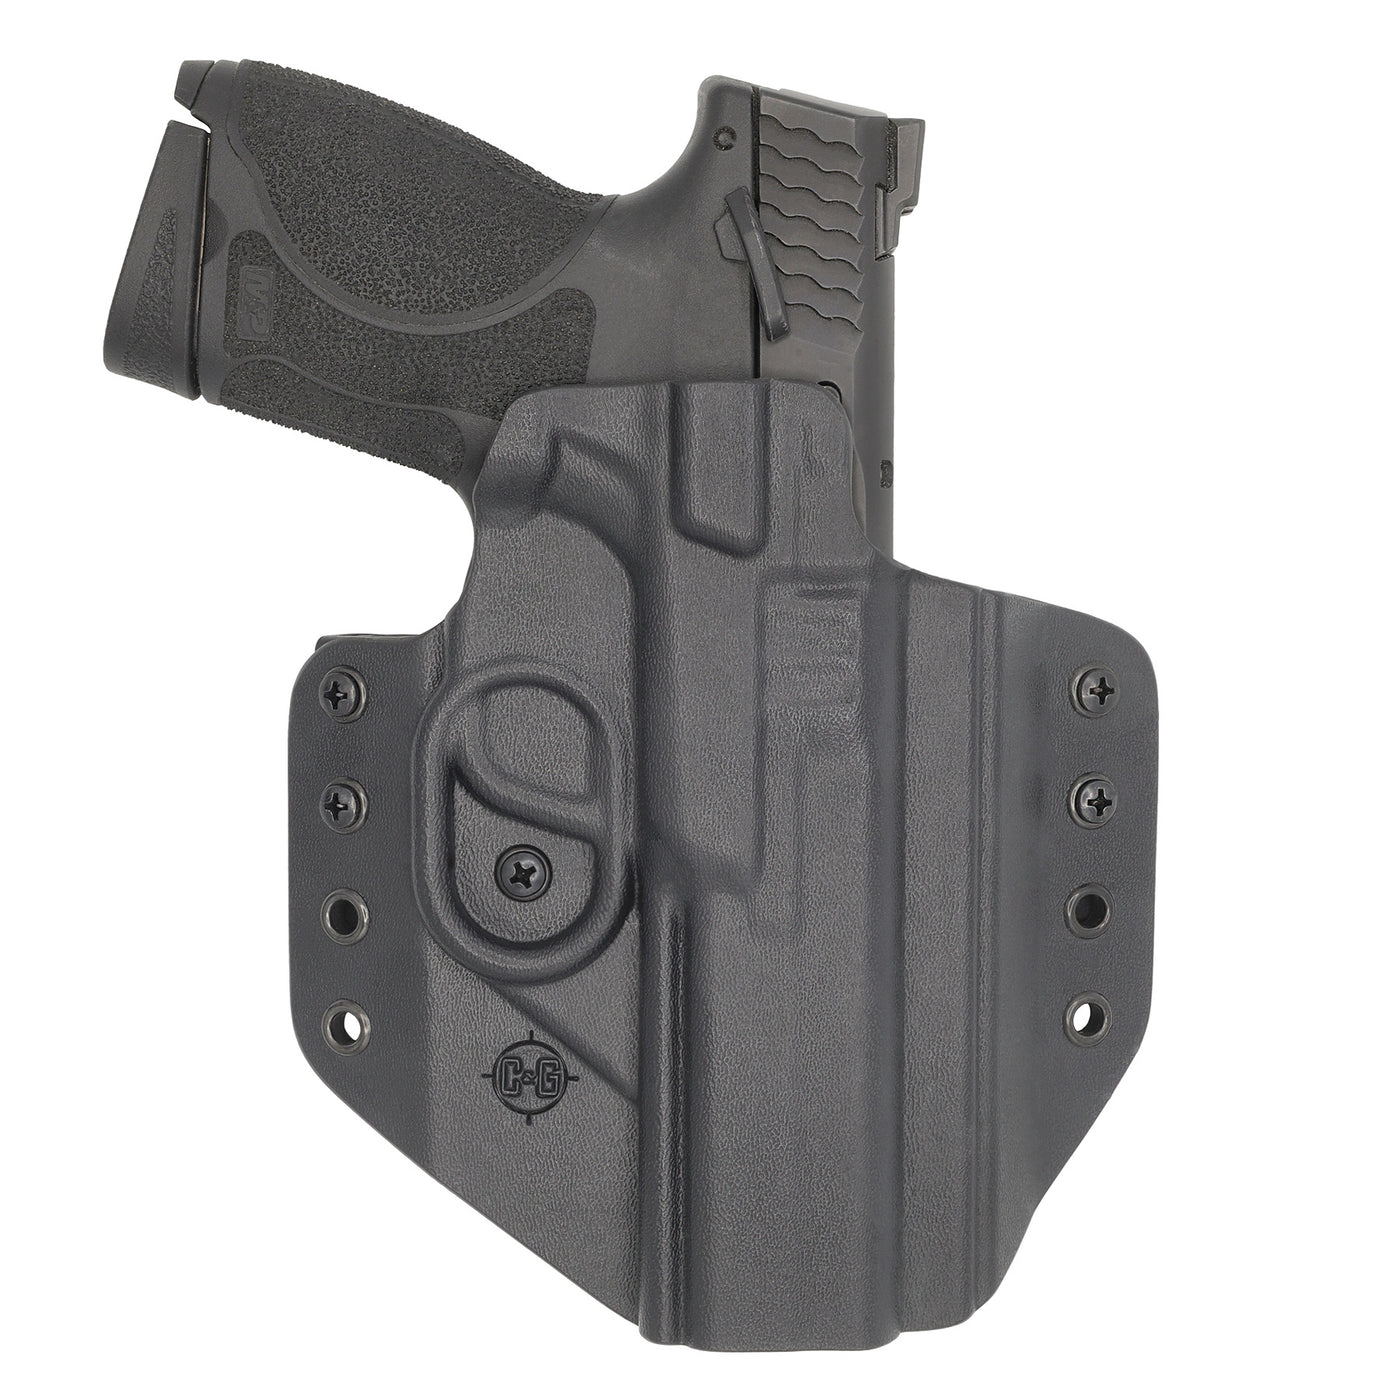 C&G Holsters custom OWB Covert S&W M&P .45cal 5" in holstered position